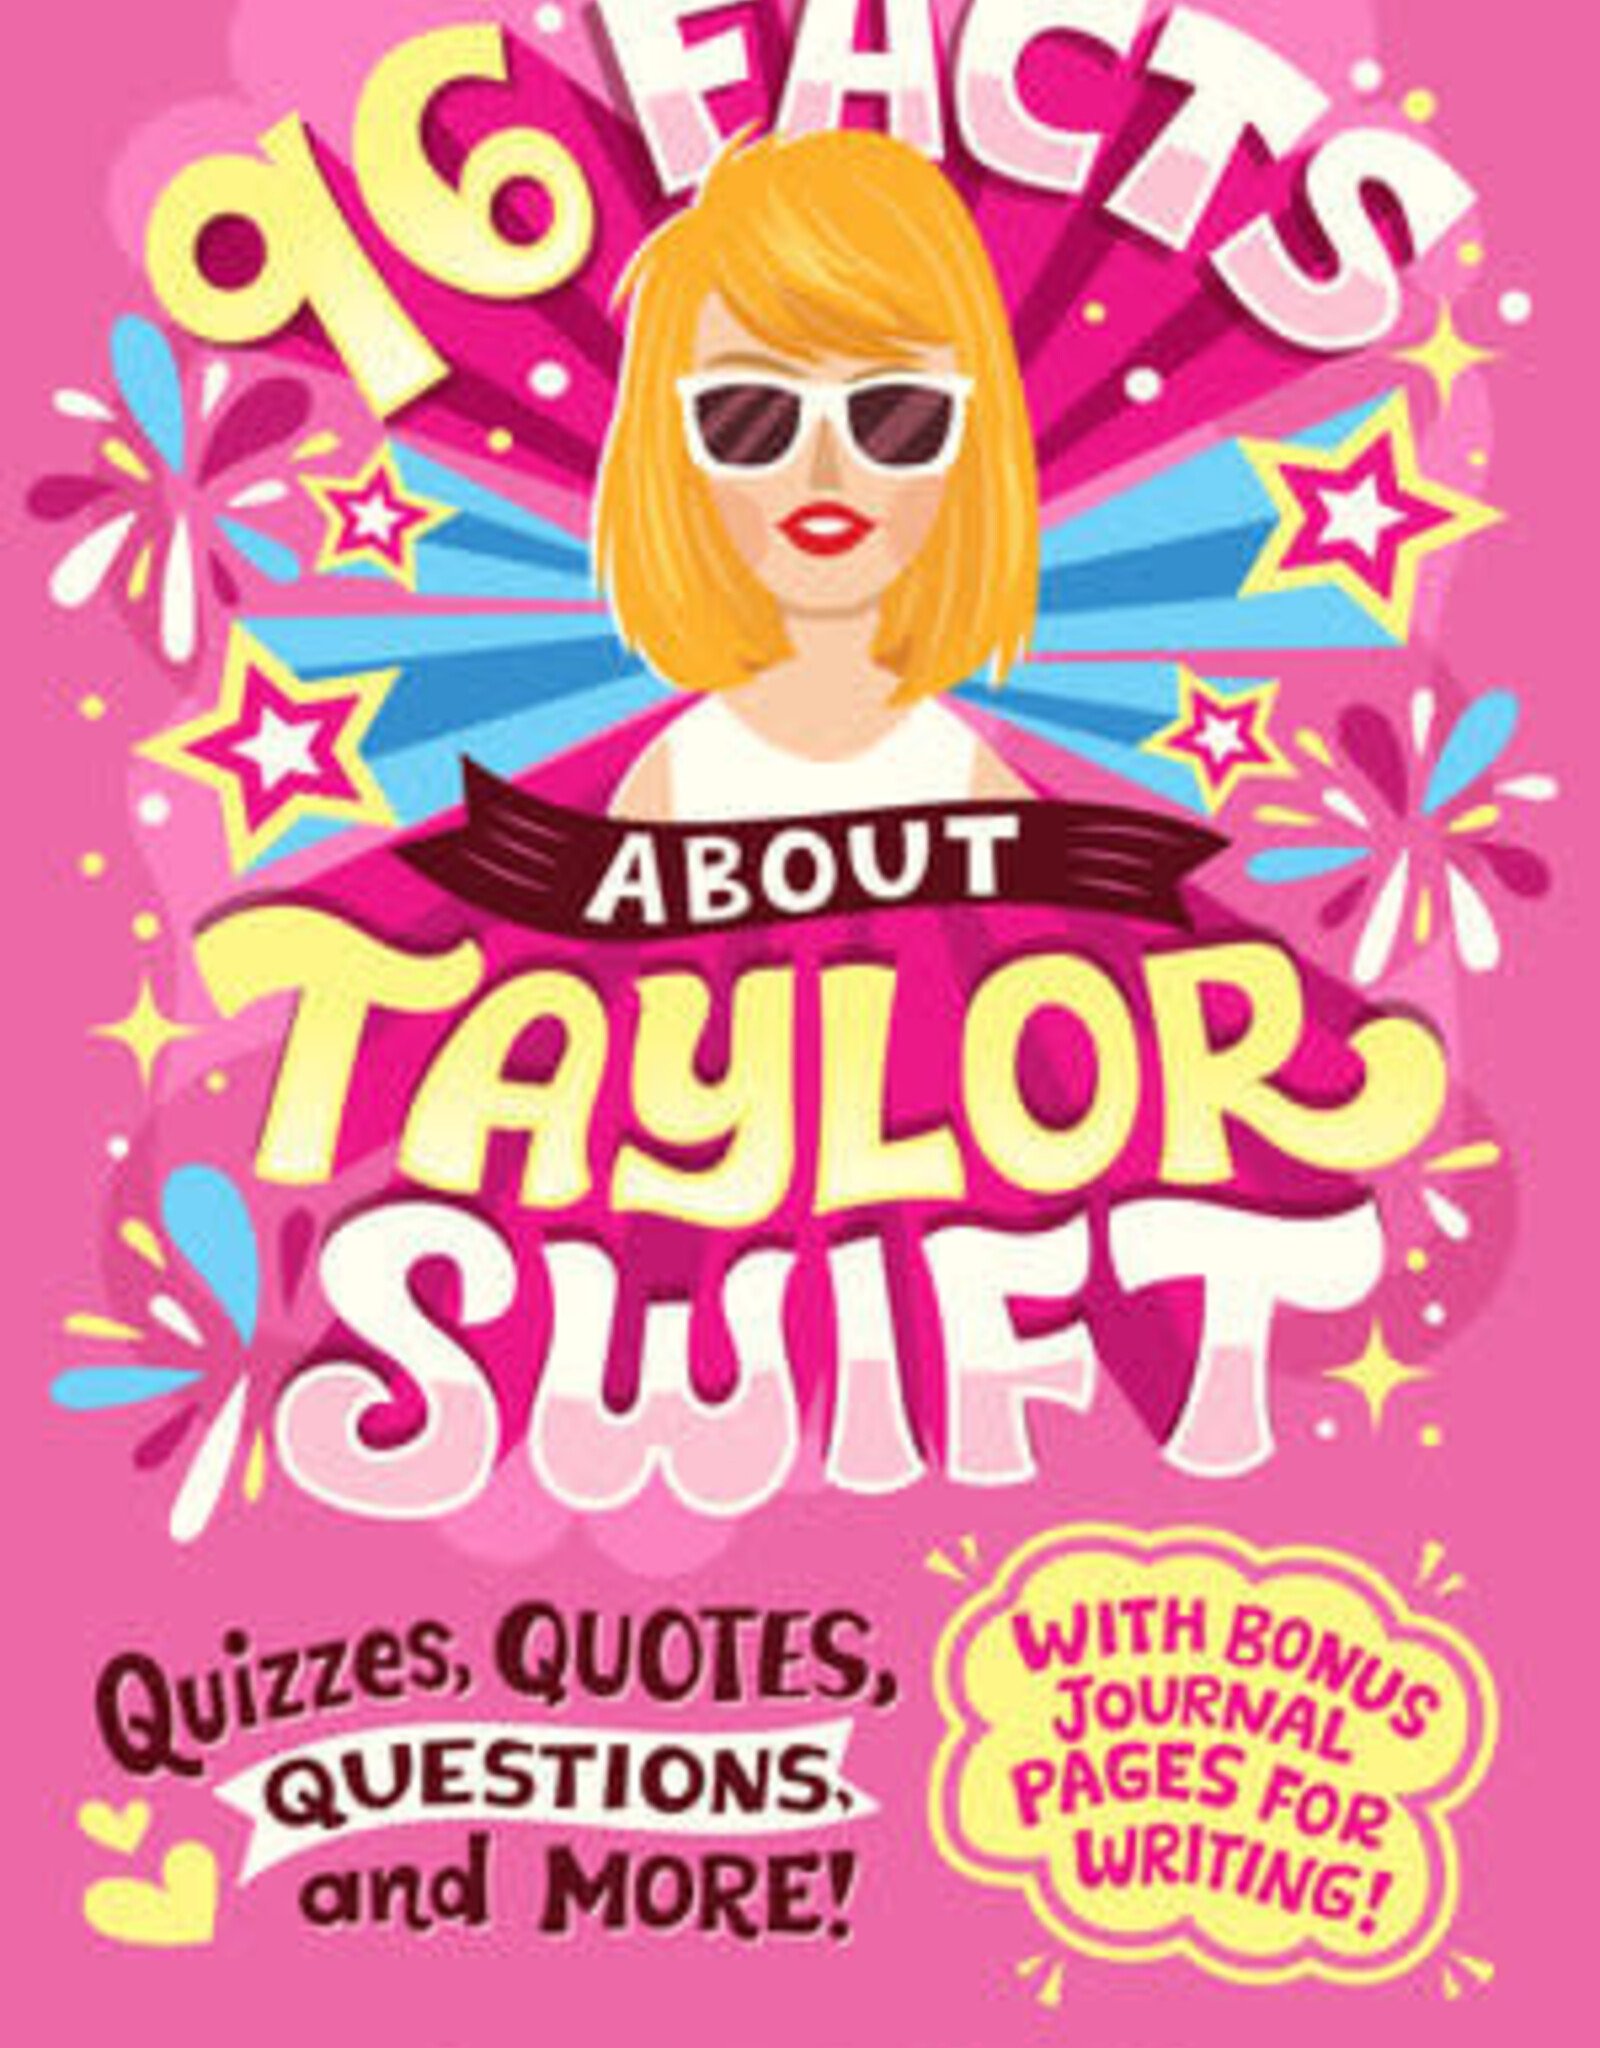 Random House/Penguin 96 Facts About Taylor Swift